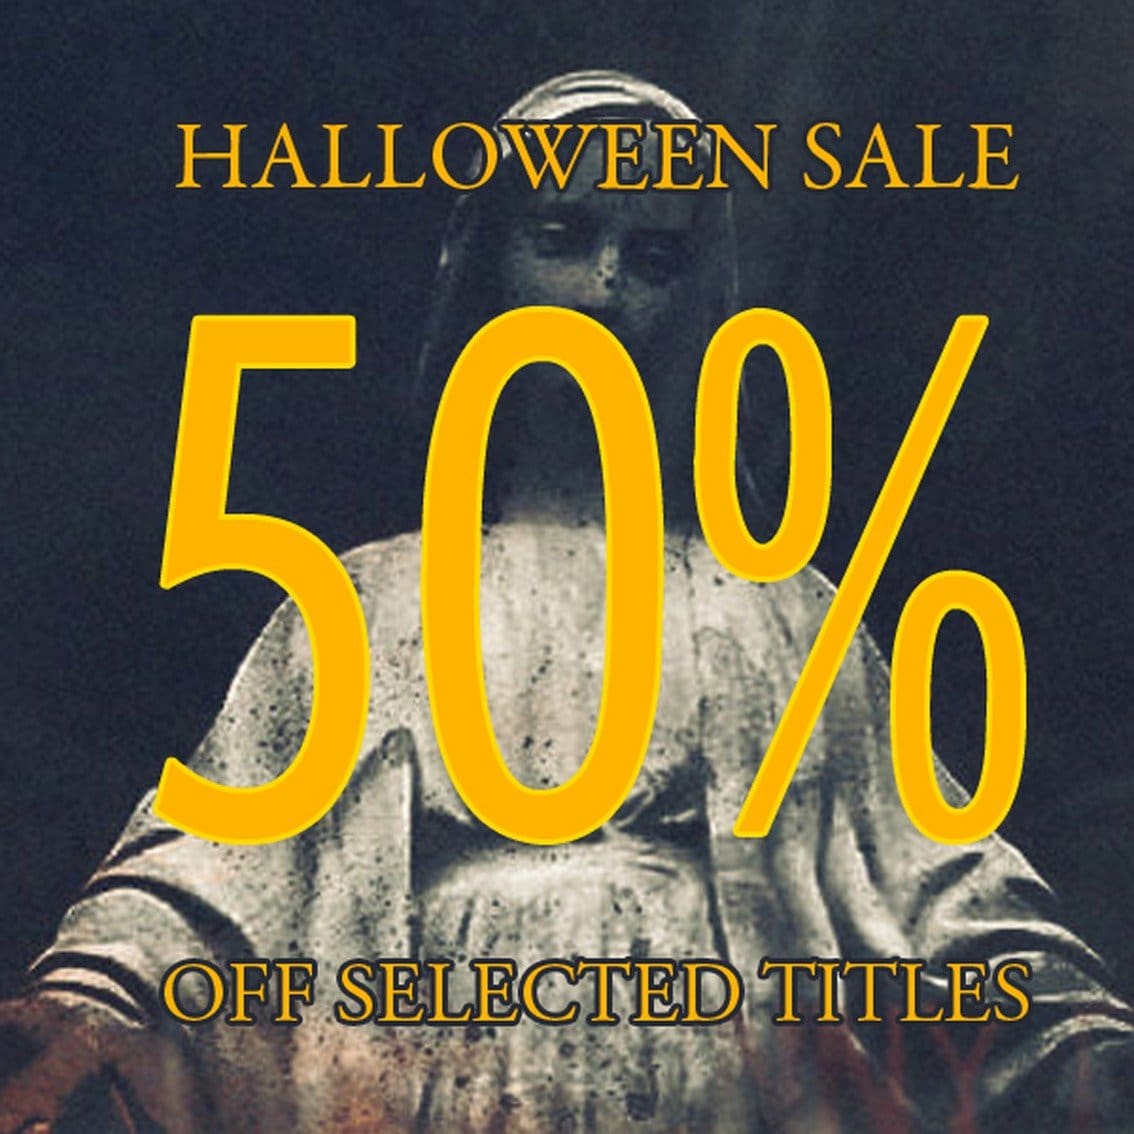 Cryo Chamber halloween sale - 50% off selected digital titles (of a dark and ominous character)